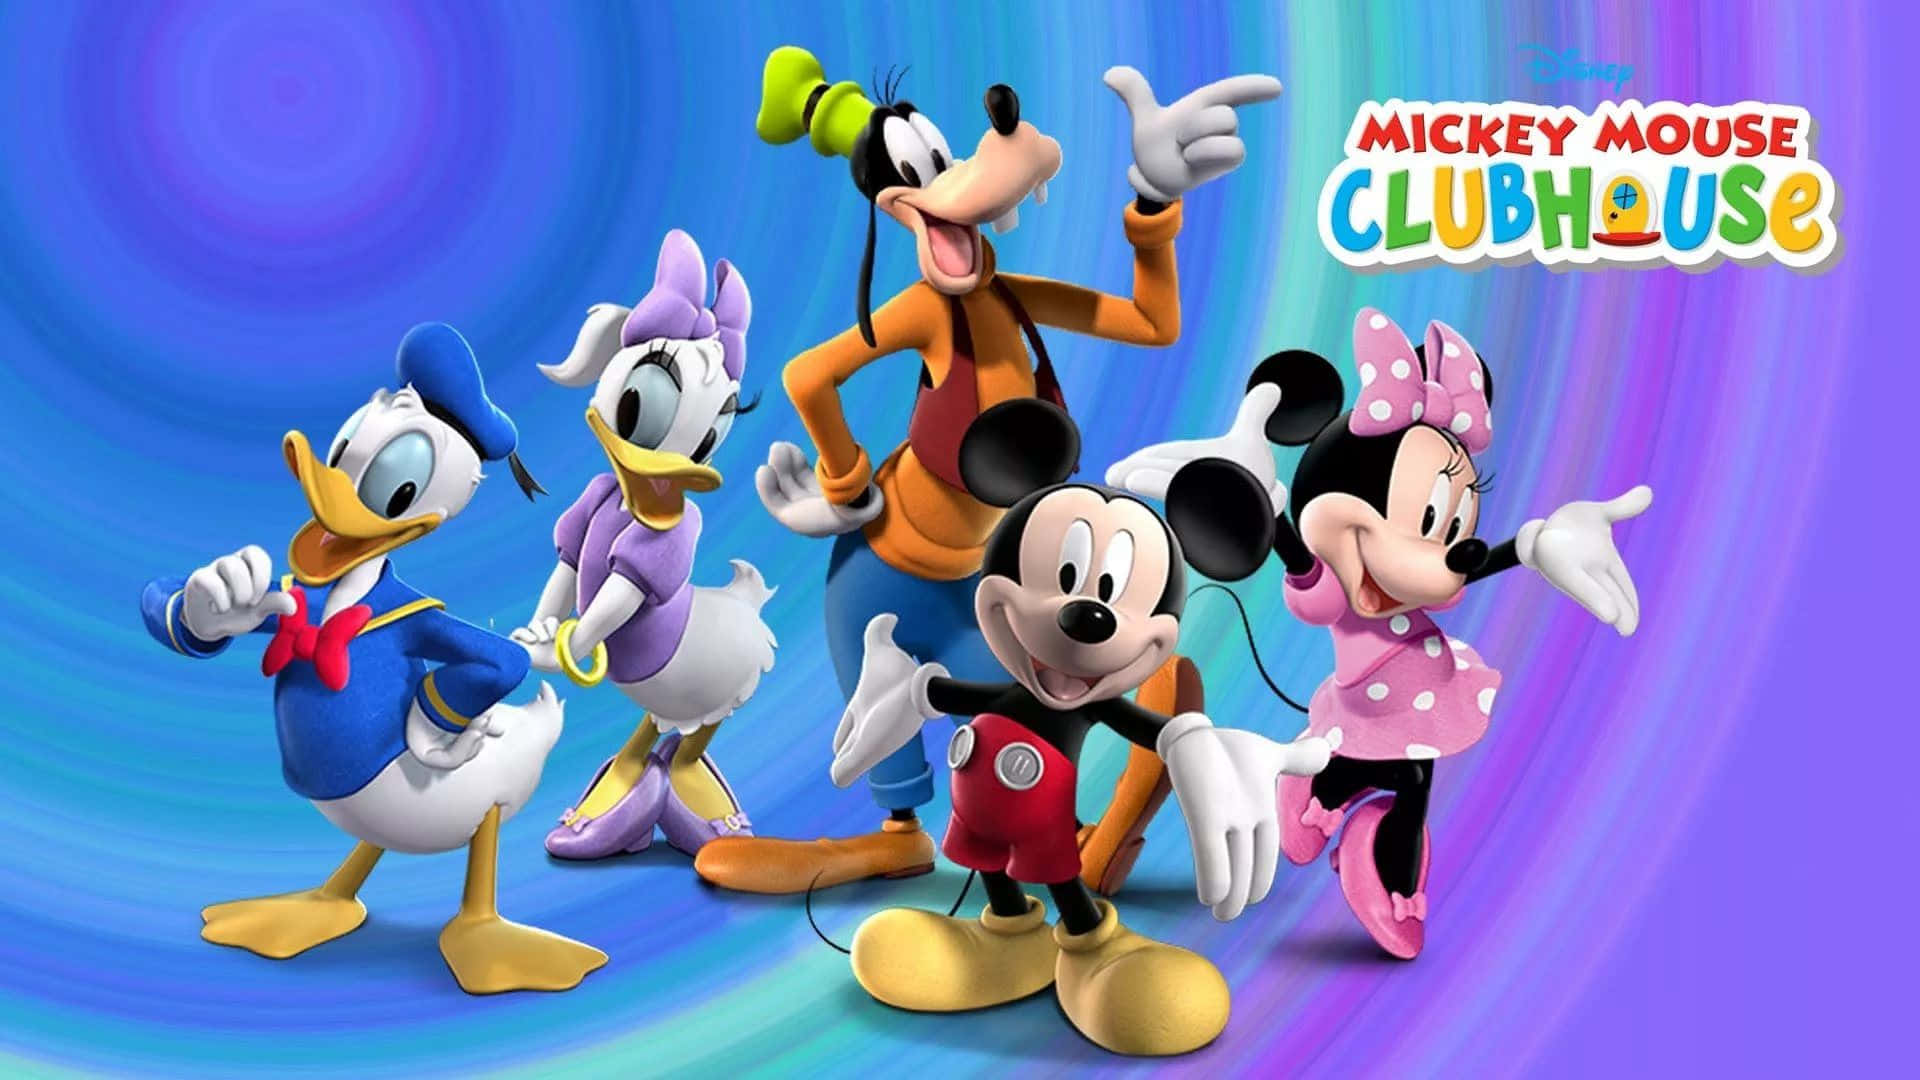 Mickeymouse Clubhouse Baggrunds Billede.